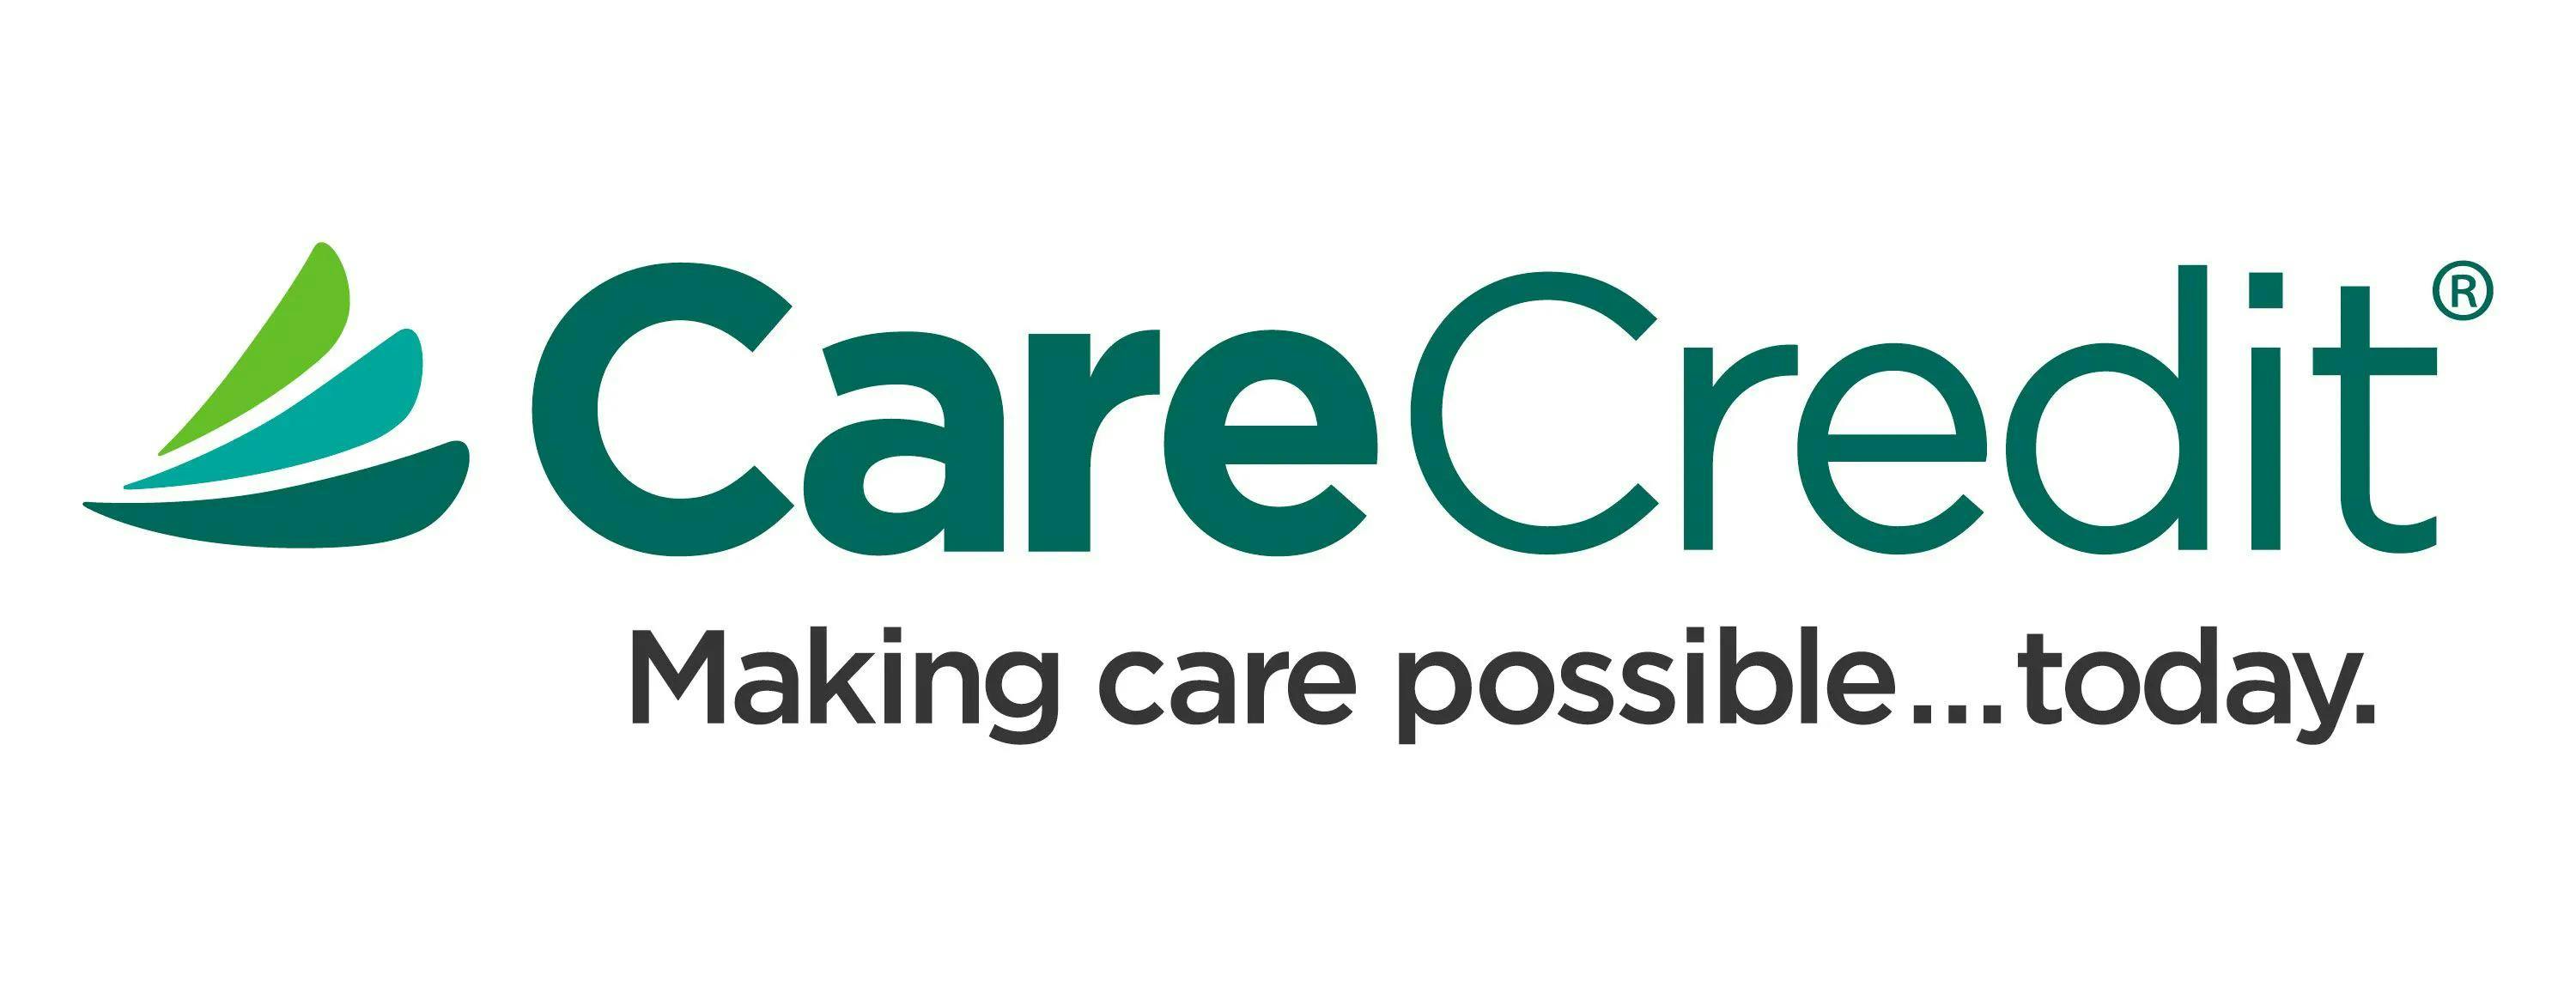 New Synchrony, Adit Partnership Expands Dental Payment Offerings | Image Credit: © CareCredit